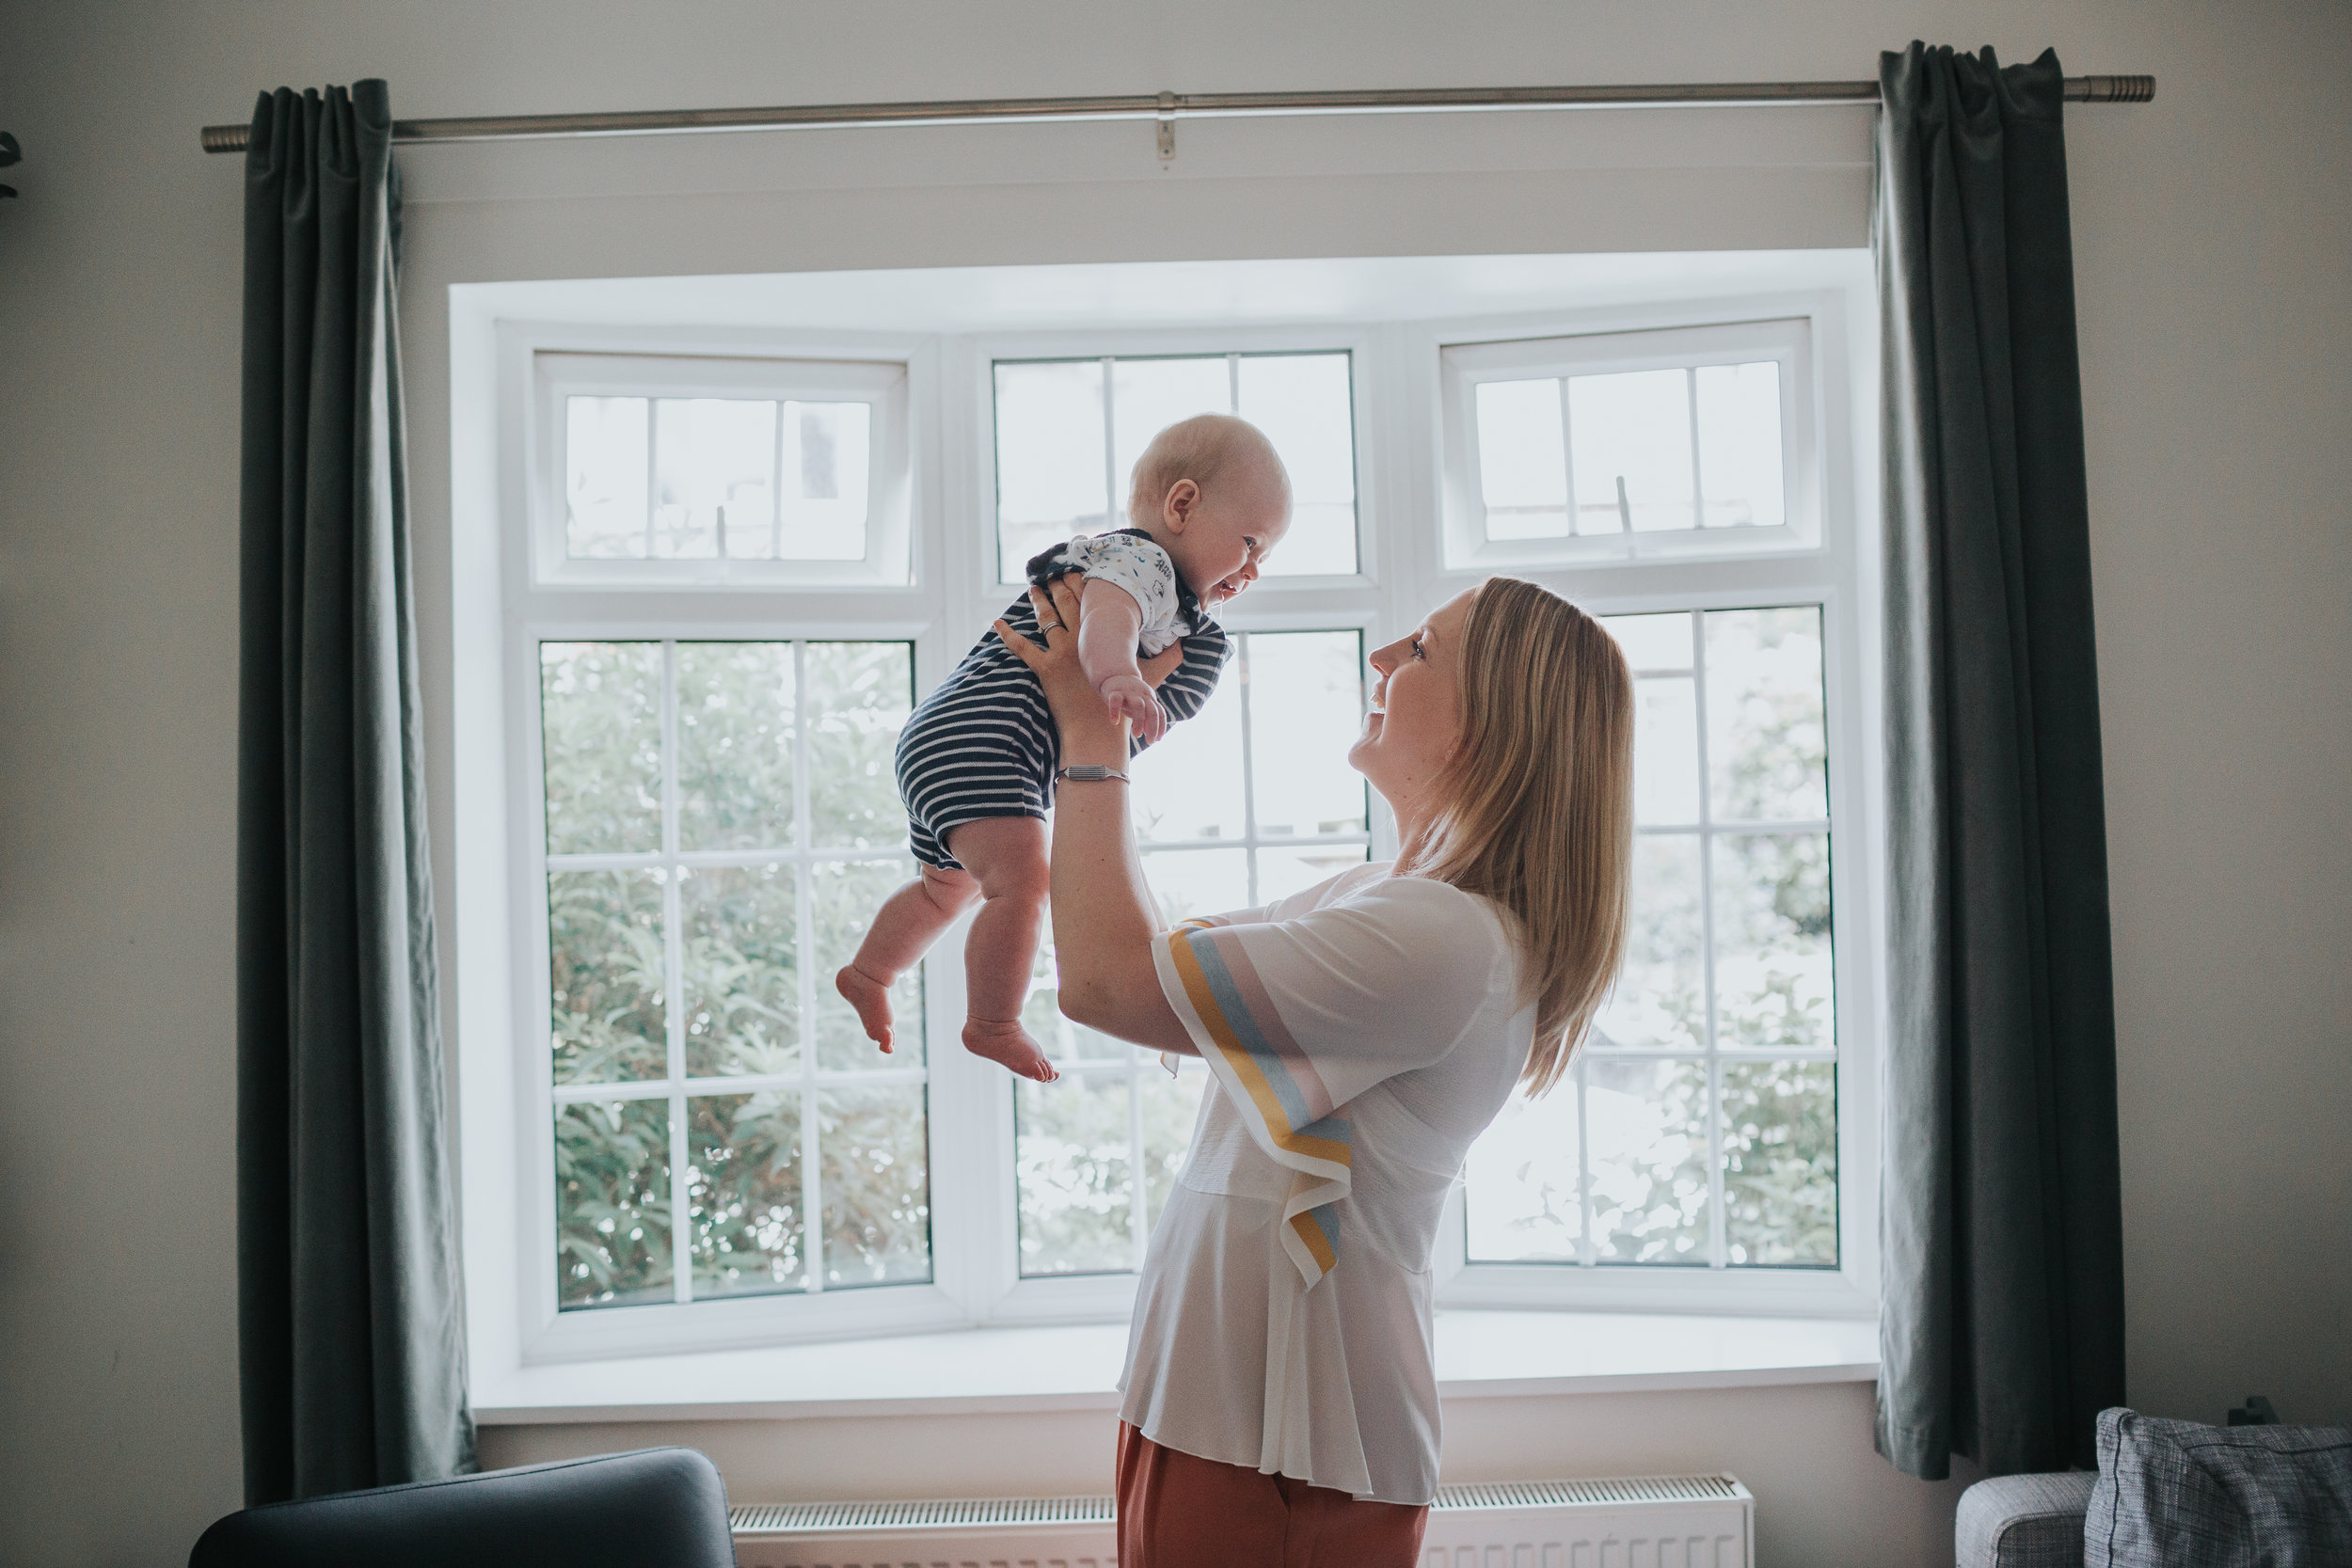 Mum chucks baby up and down in front of their living room window. 